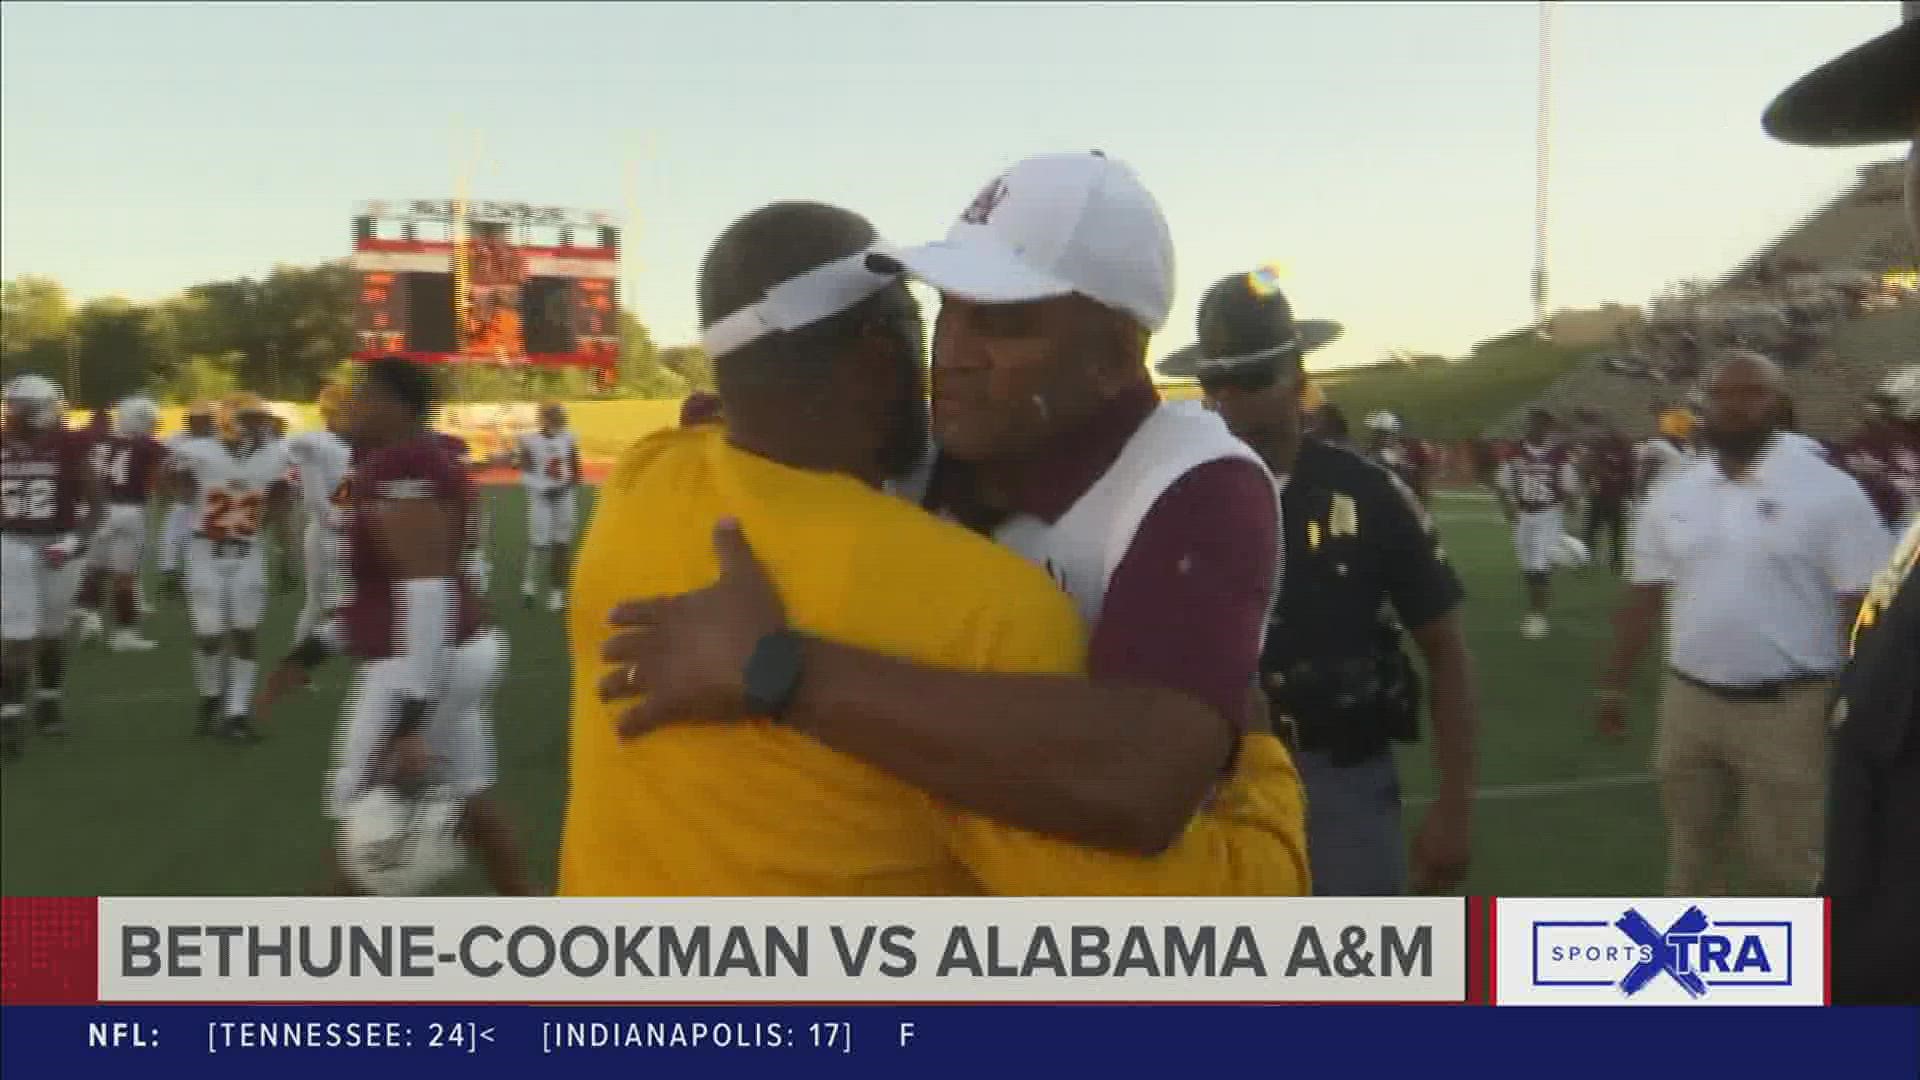 Alabama A&M running back Donovan Eaglin ran for 190 yards and scored three touchdowns in Alabama A&M's 35-27 victory over Bethune-Cookman.